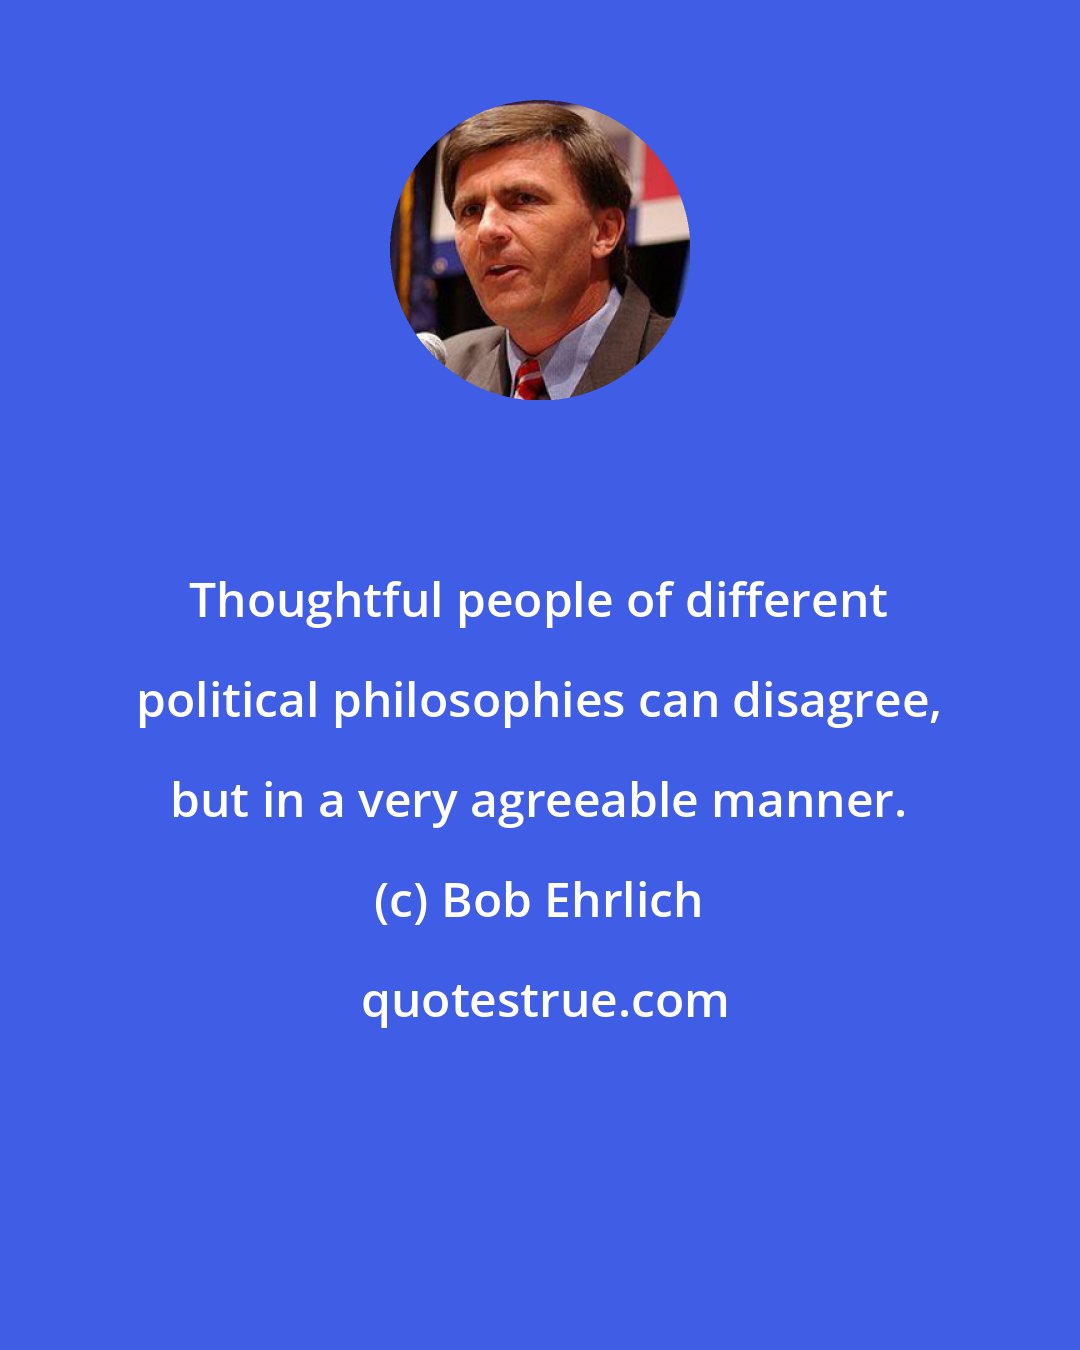 Bob Ehrlich: Thoughtful people of different political philosophies can disagree, but in a very agreeable manner.